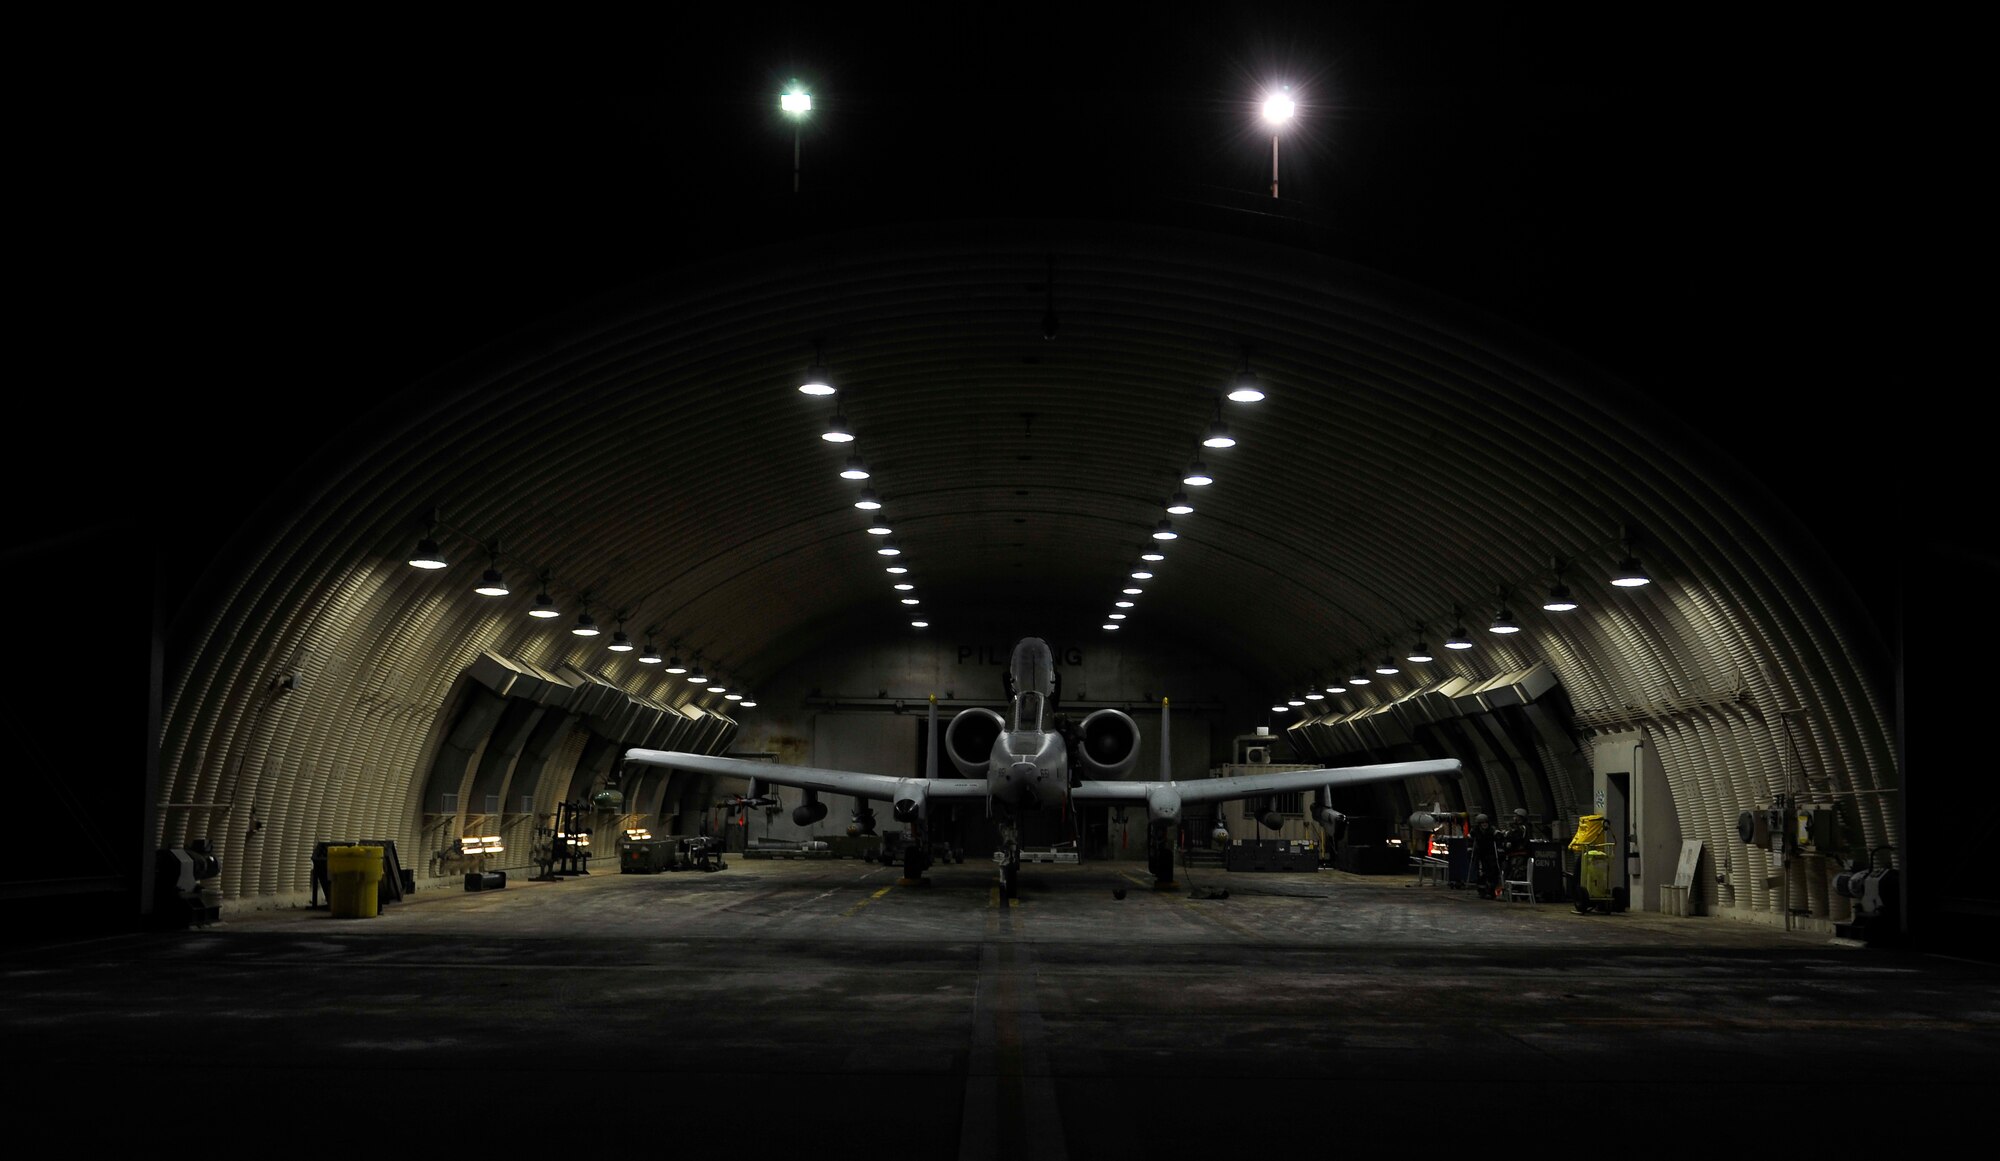 An A10 Thunderbolt II sits in a hangar prior to being prepped for launch Dec. 5, 2014, during Exercise Beverly Bulldog 15-01 at Osan Air Base, Republic of Korea. The exercise focuses on readiness, testing Osan’s wartime procedures and realistically looking at our ability to defend the base, execute operations and receive follow-on forces. (U.S. Air Force photo by Senior Airman David Owsianka)